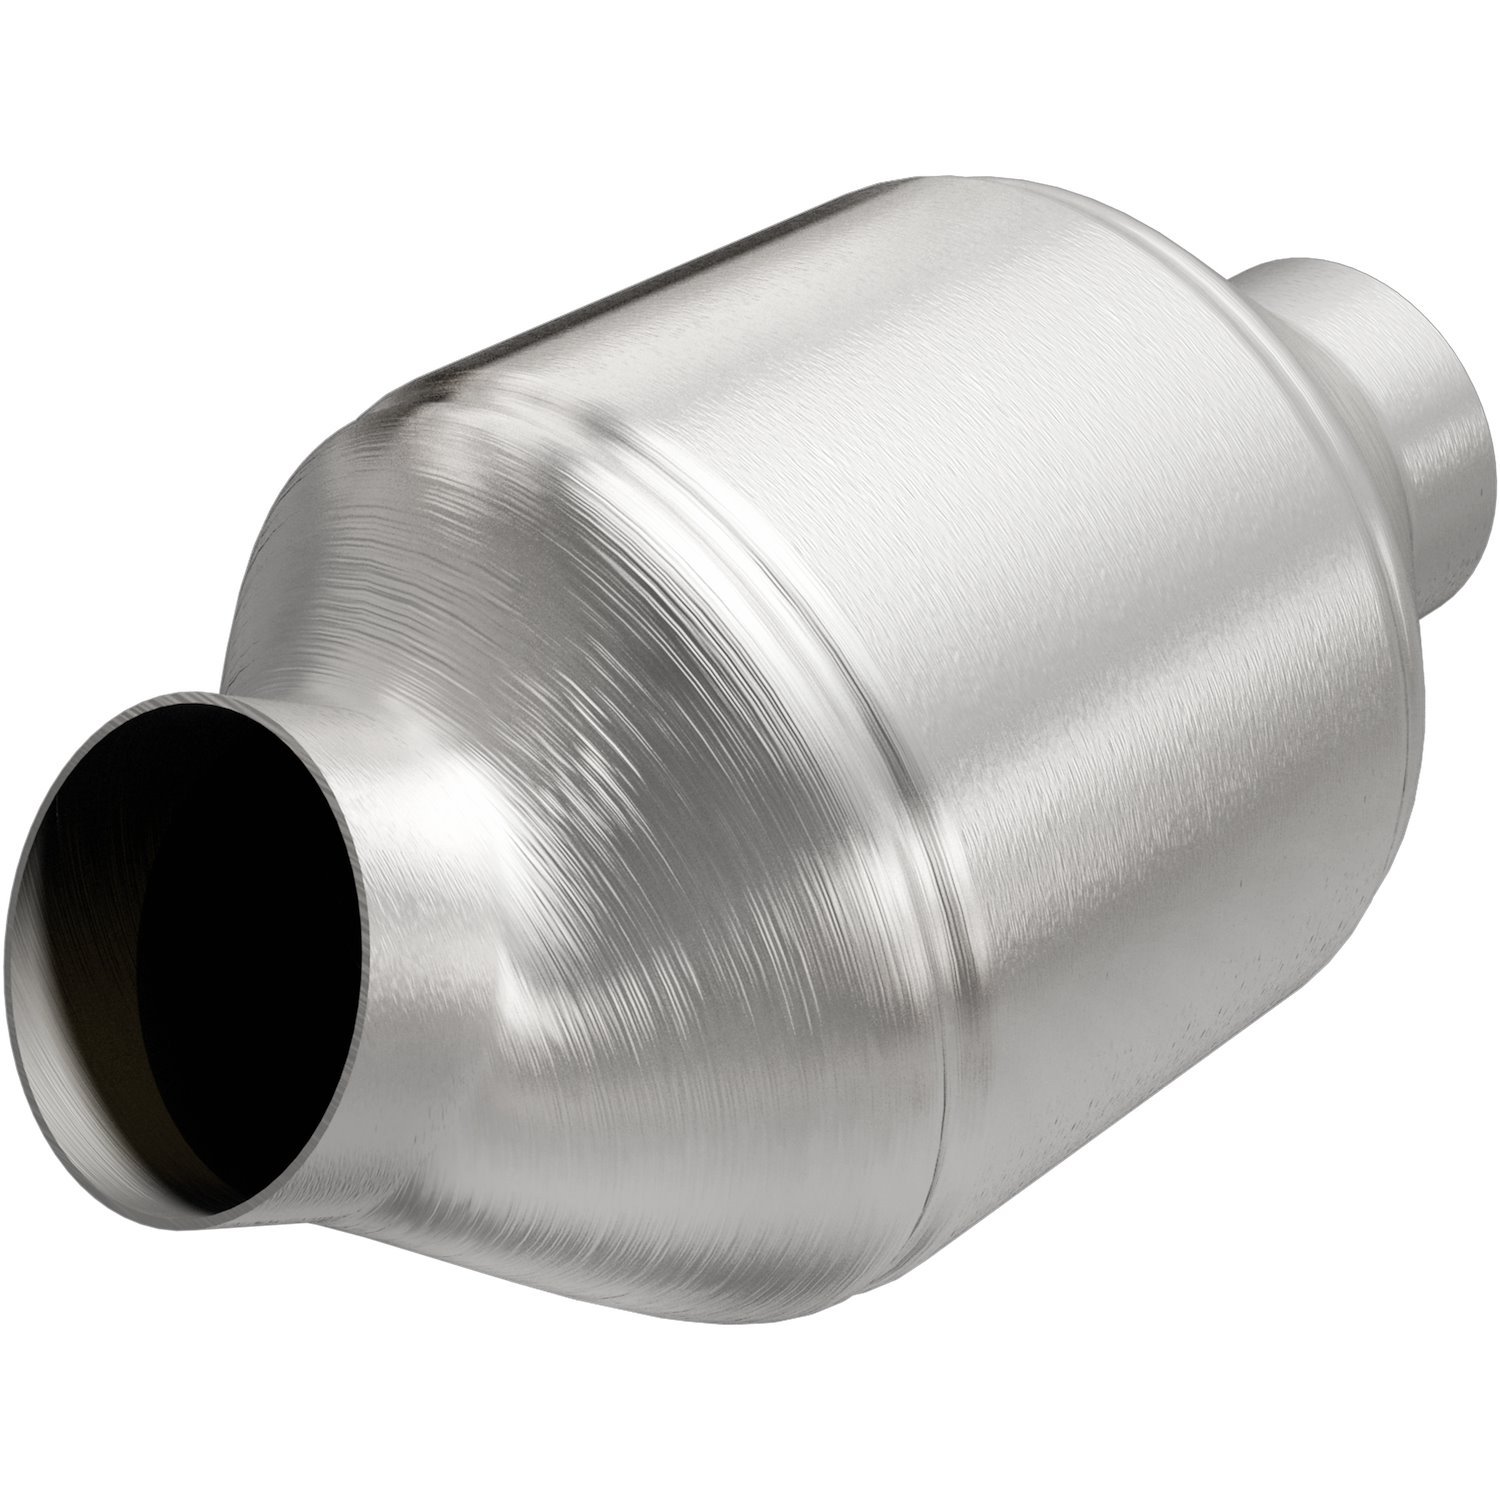 California Emissions OBD-II Spun Catalytic Converter Inlet/Outlet: 2.5" (Angled Inlet)